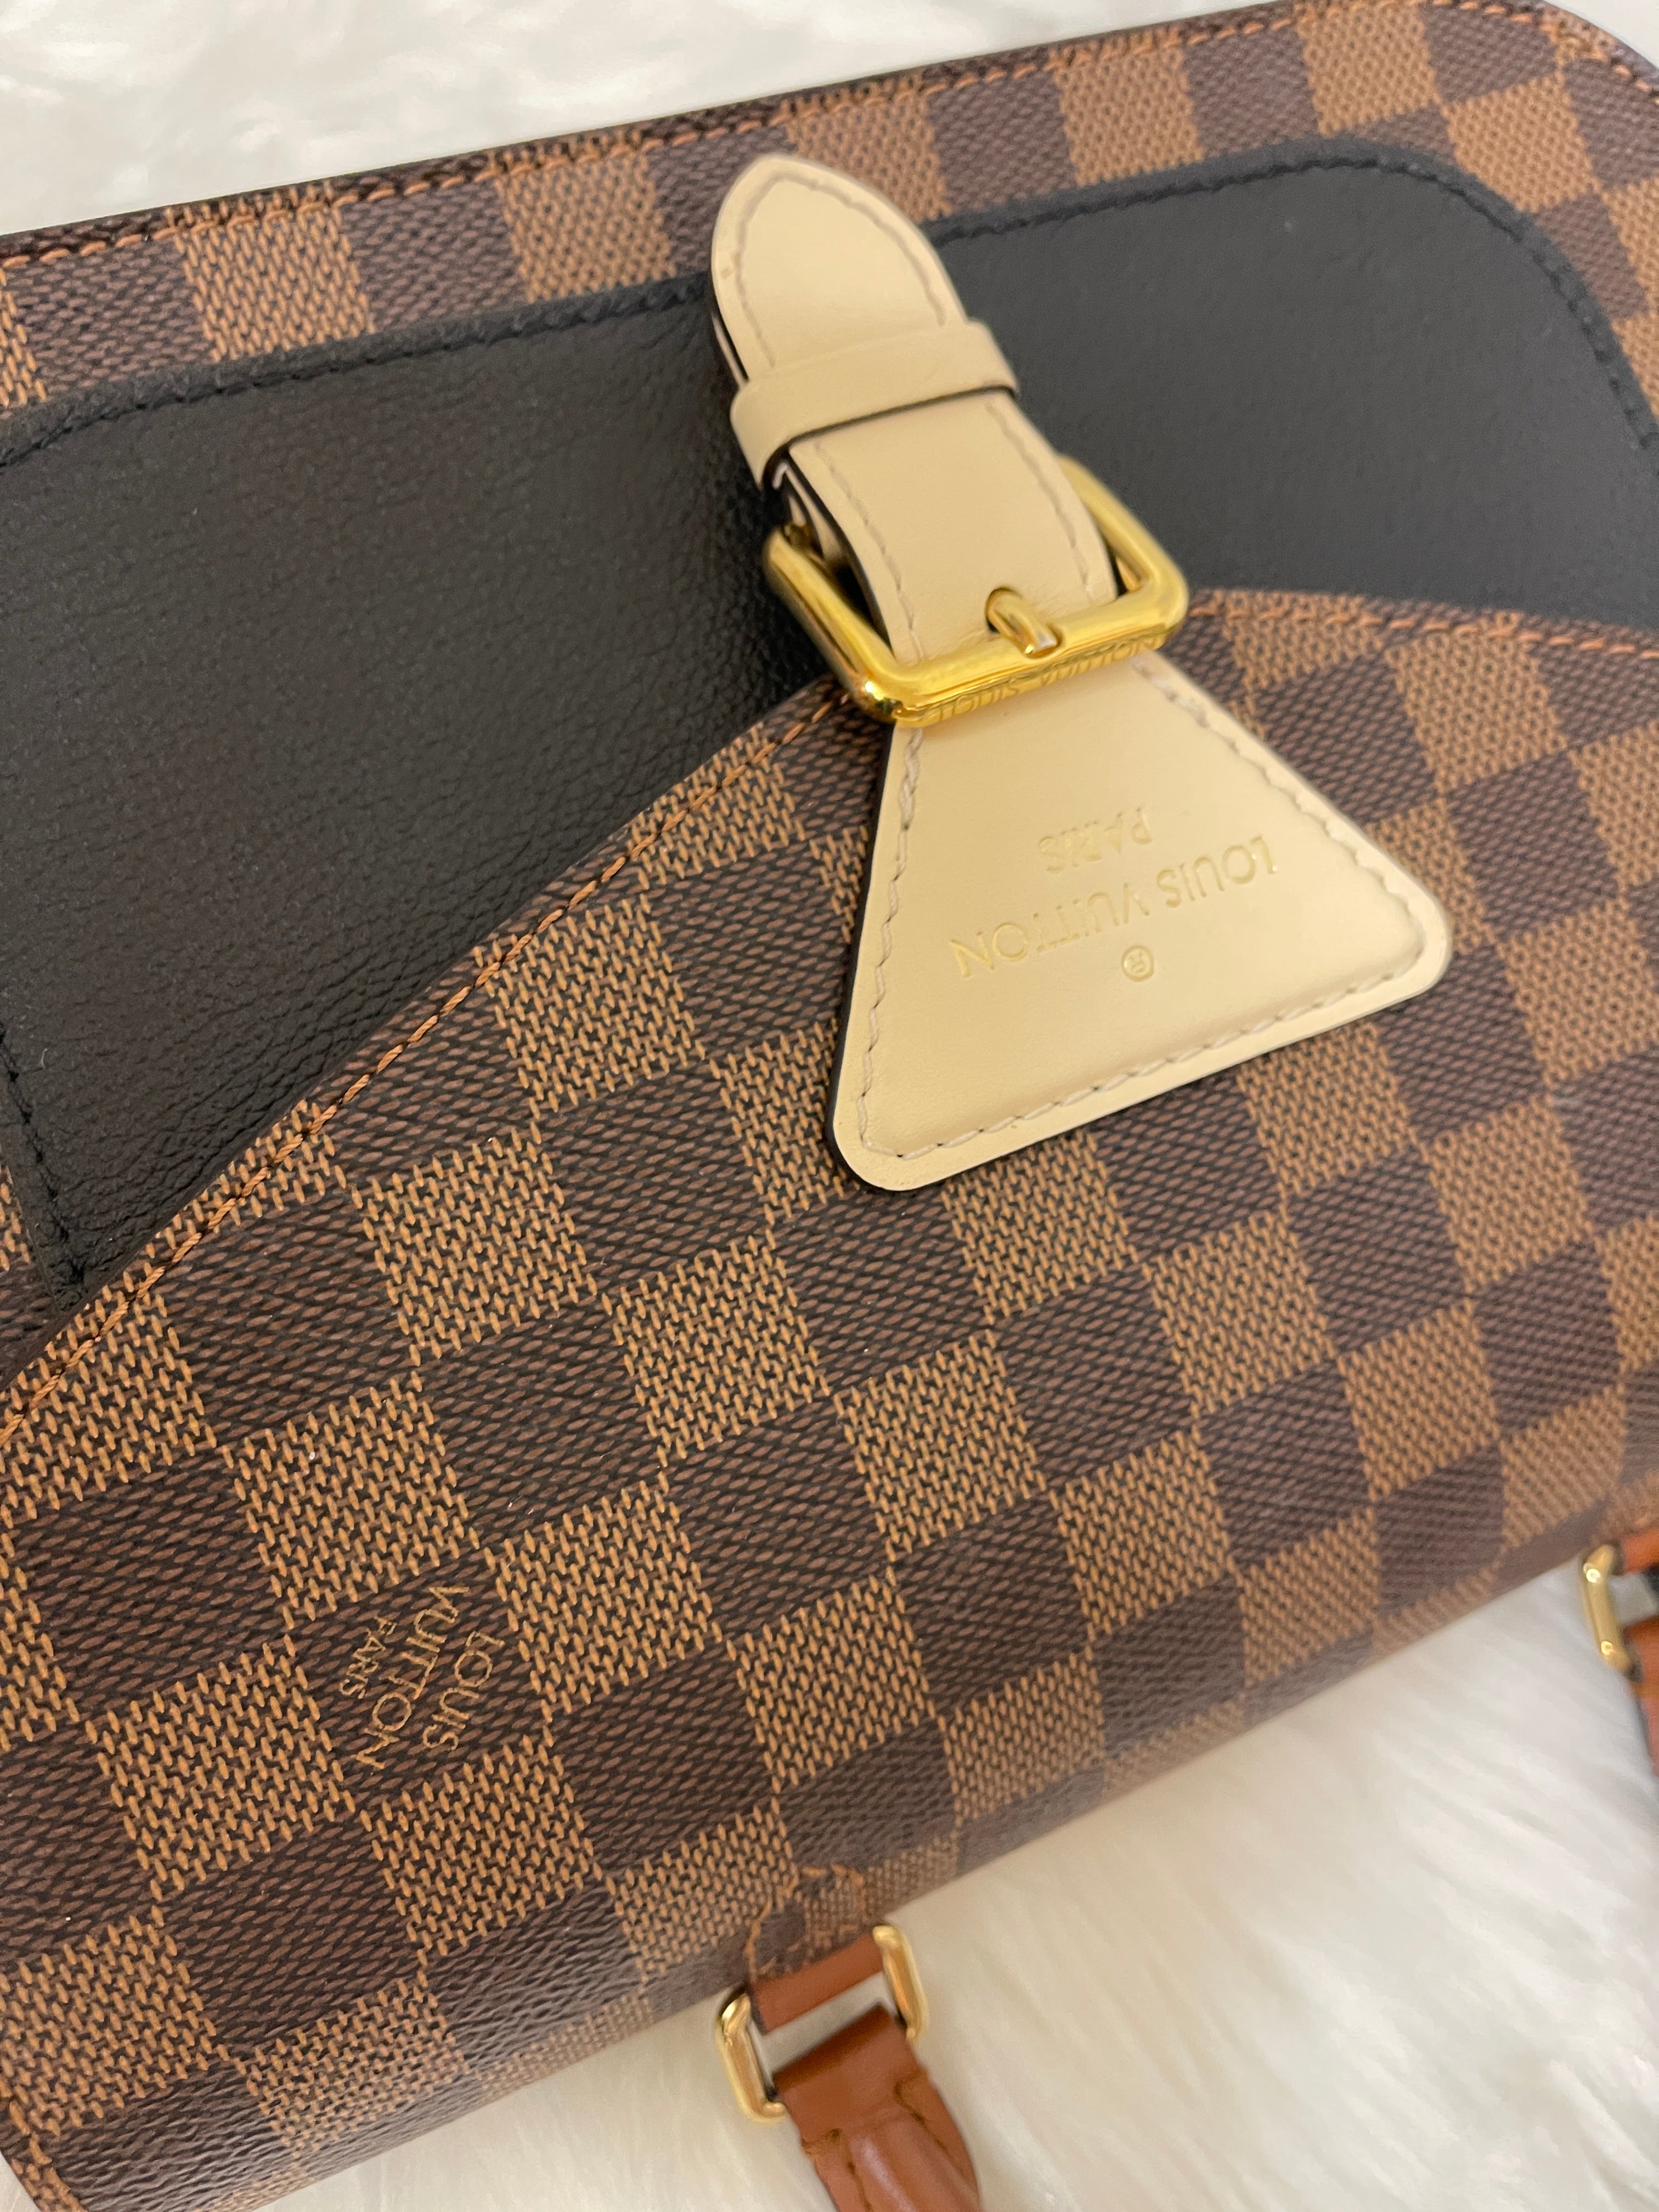 Louis Vuitton Clapton Backpack Discontinued